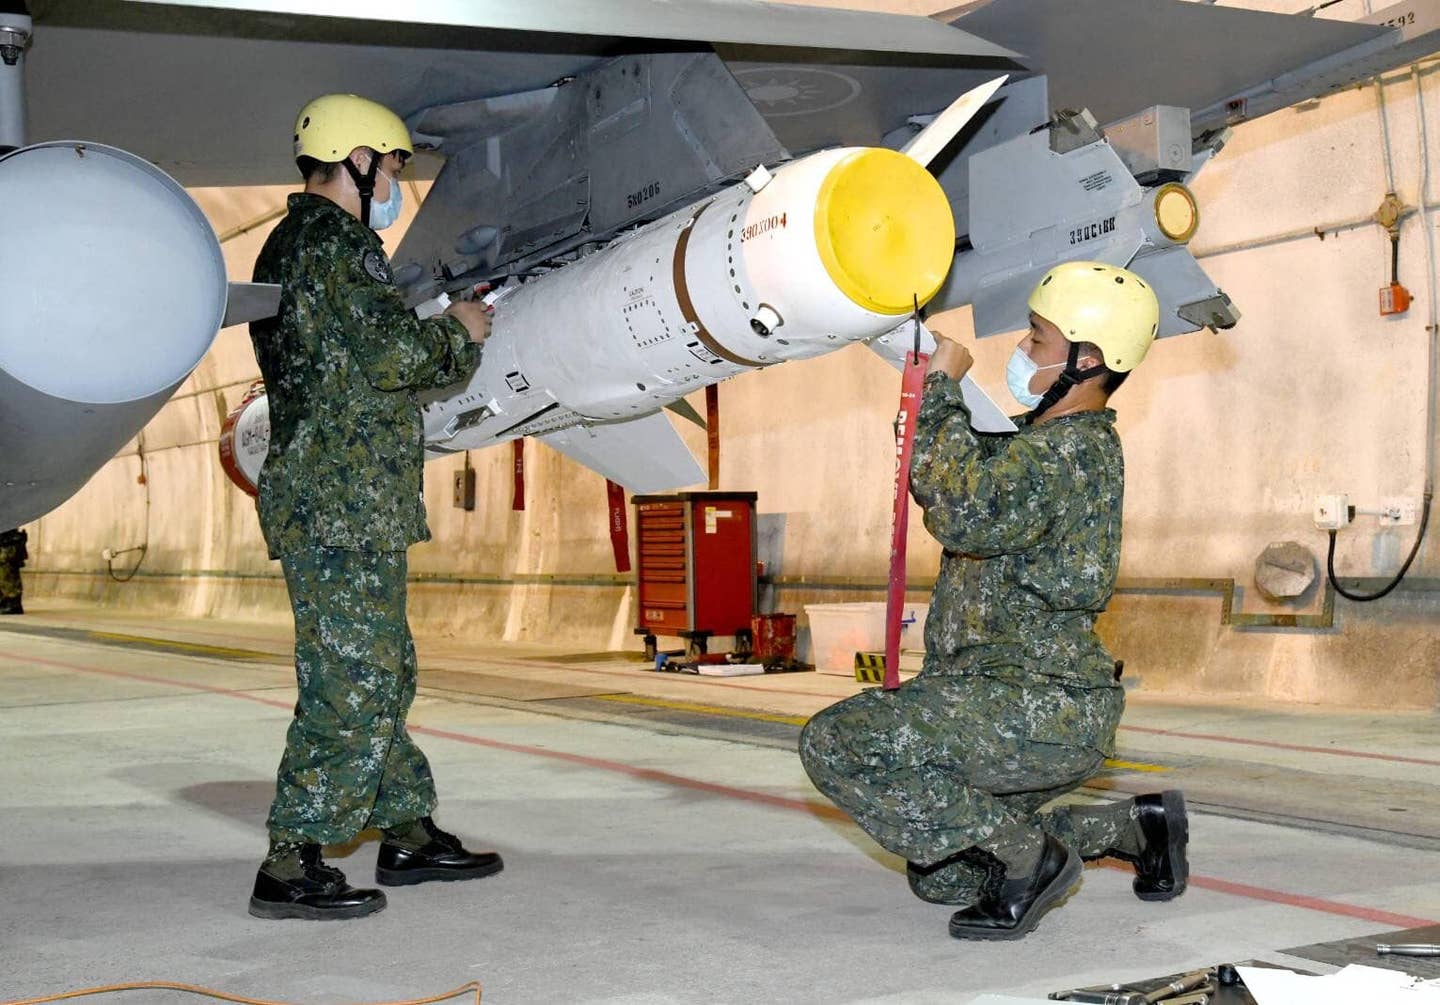 Two ROCAF crewmembers load a Harpoon anti-ship missile onto an F-16 in Chiashan's underground hangar during a weapons loading exercise. <em>Credit: ROCAF</em>